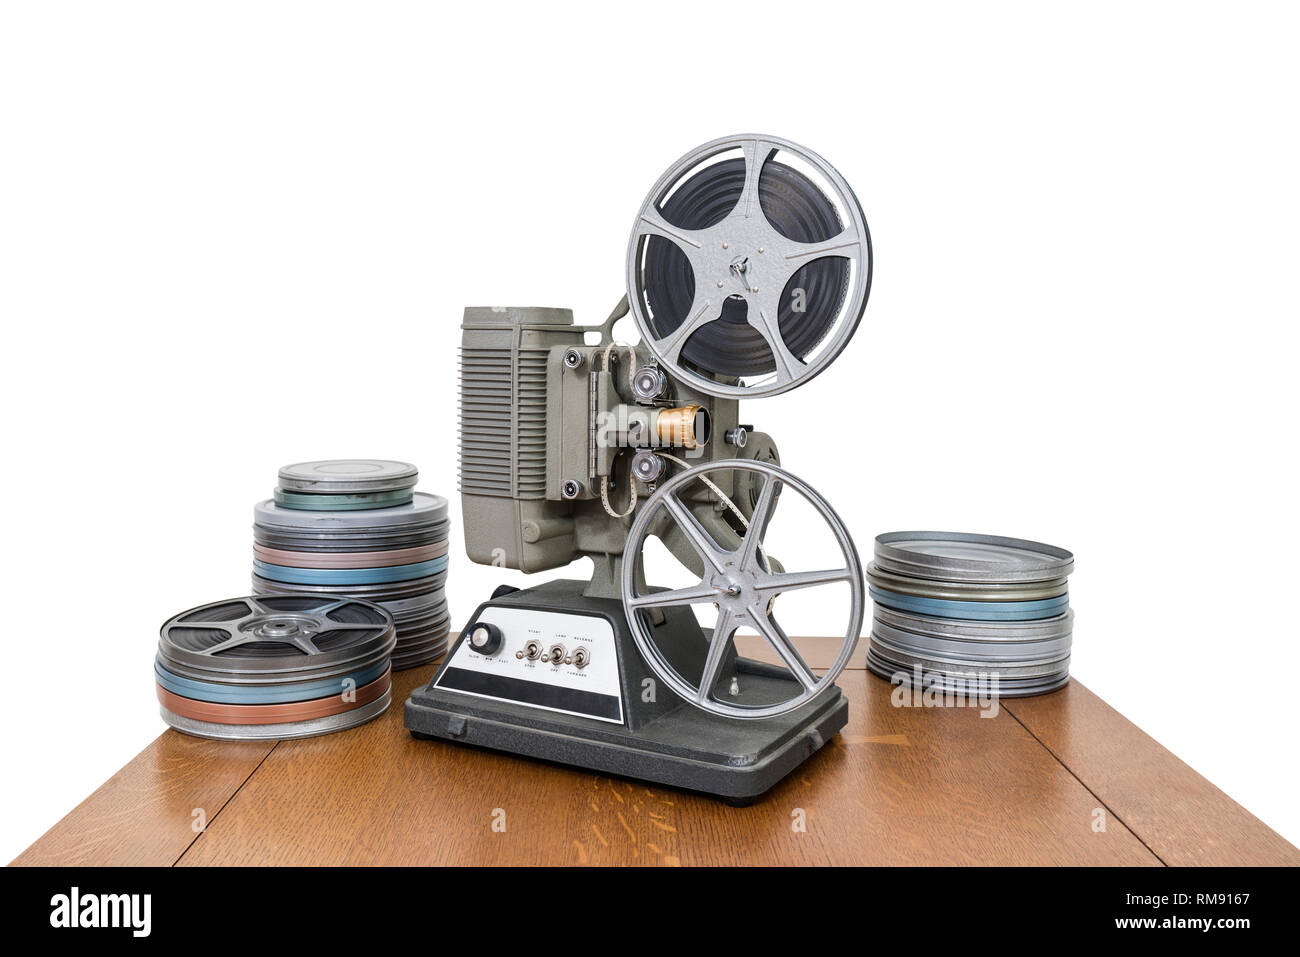 https://c8.alamy.com/comp/RM9167/vintage-8mm-home-movie-projector-and-film-cans-isolated-on-white-RM9167.jpg